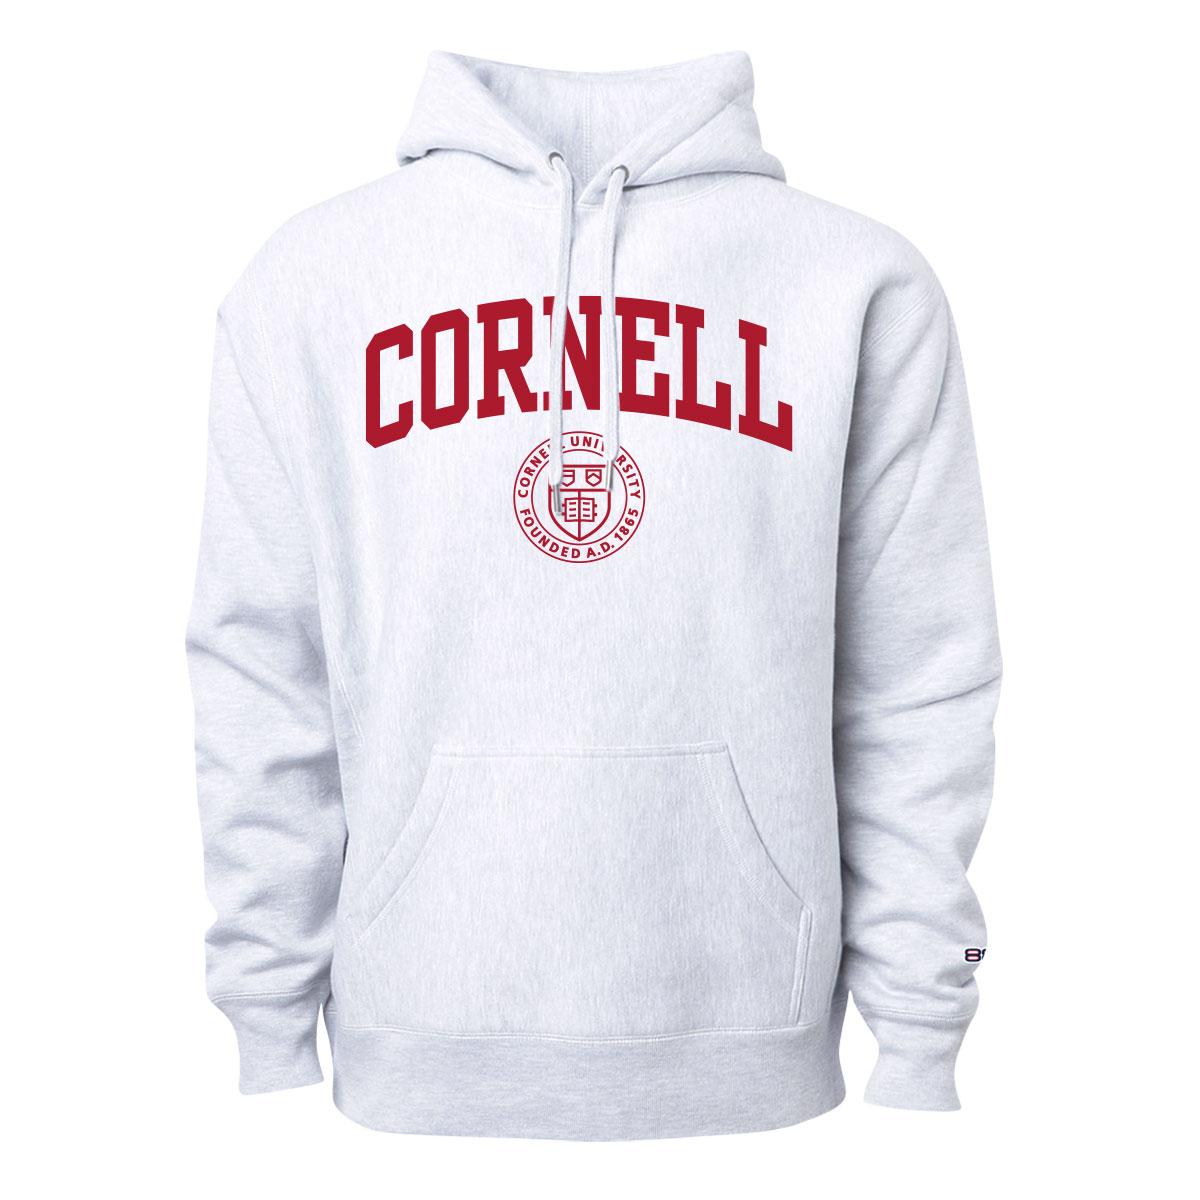 Cornell Over Seal Imprinted Reverse